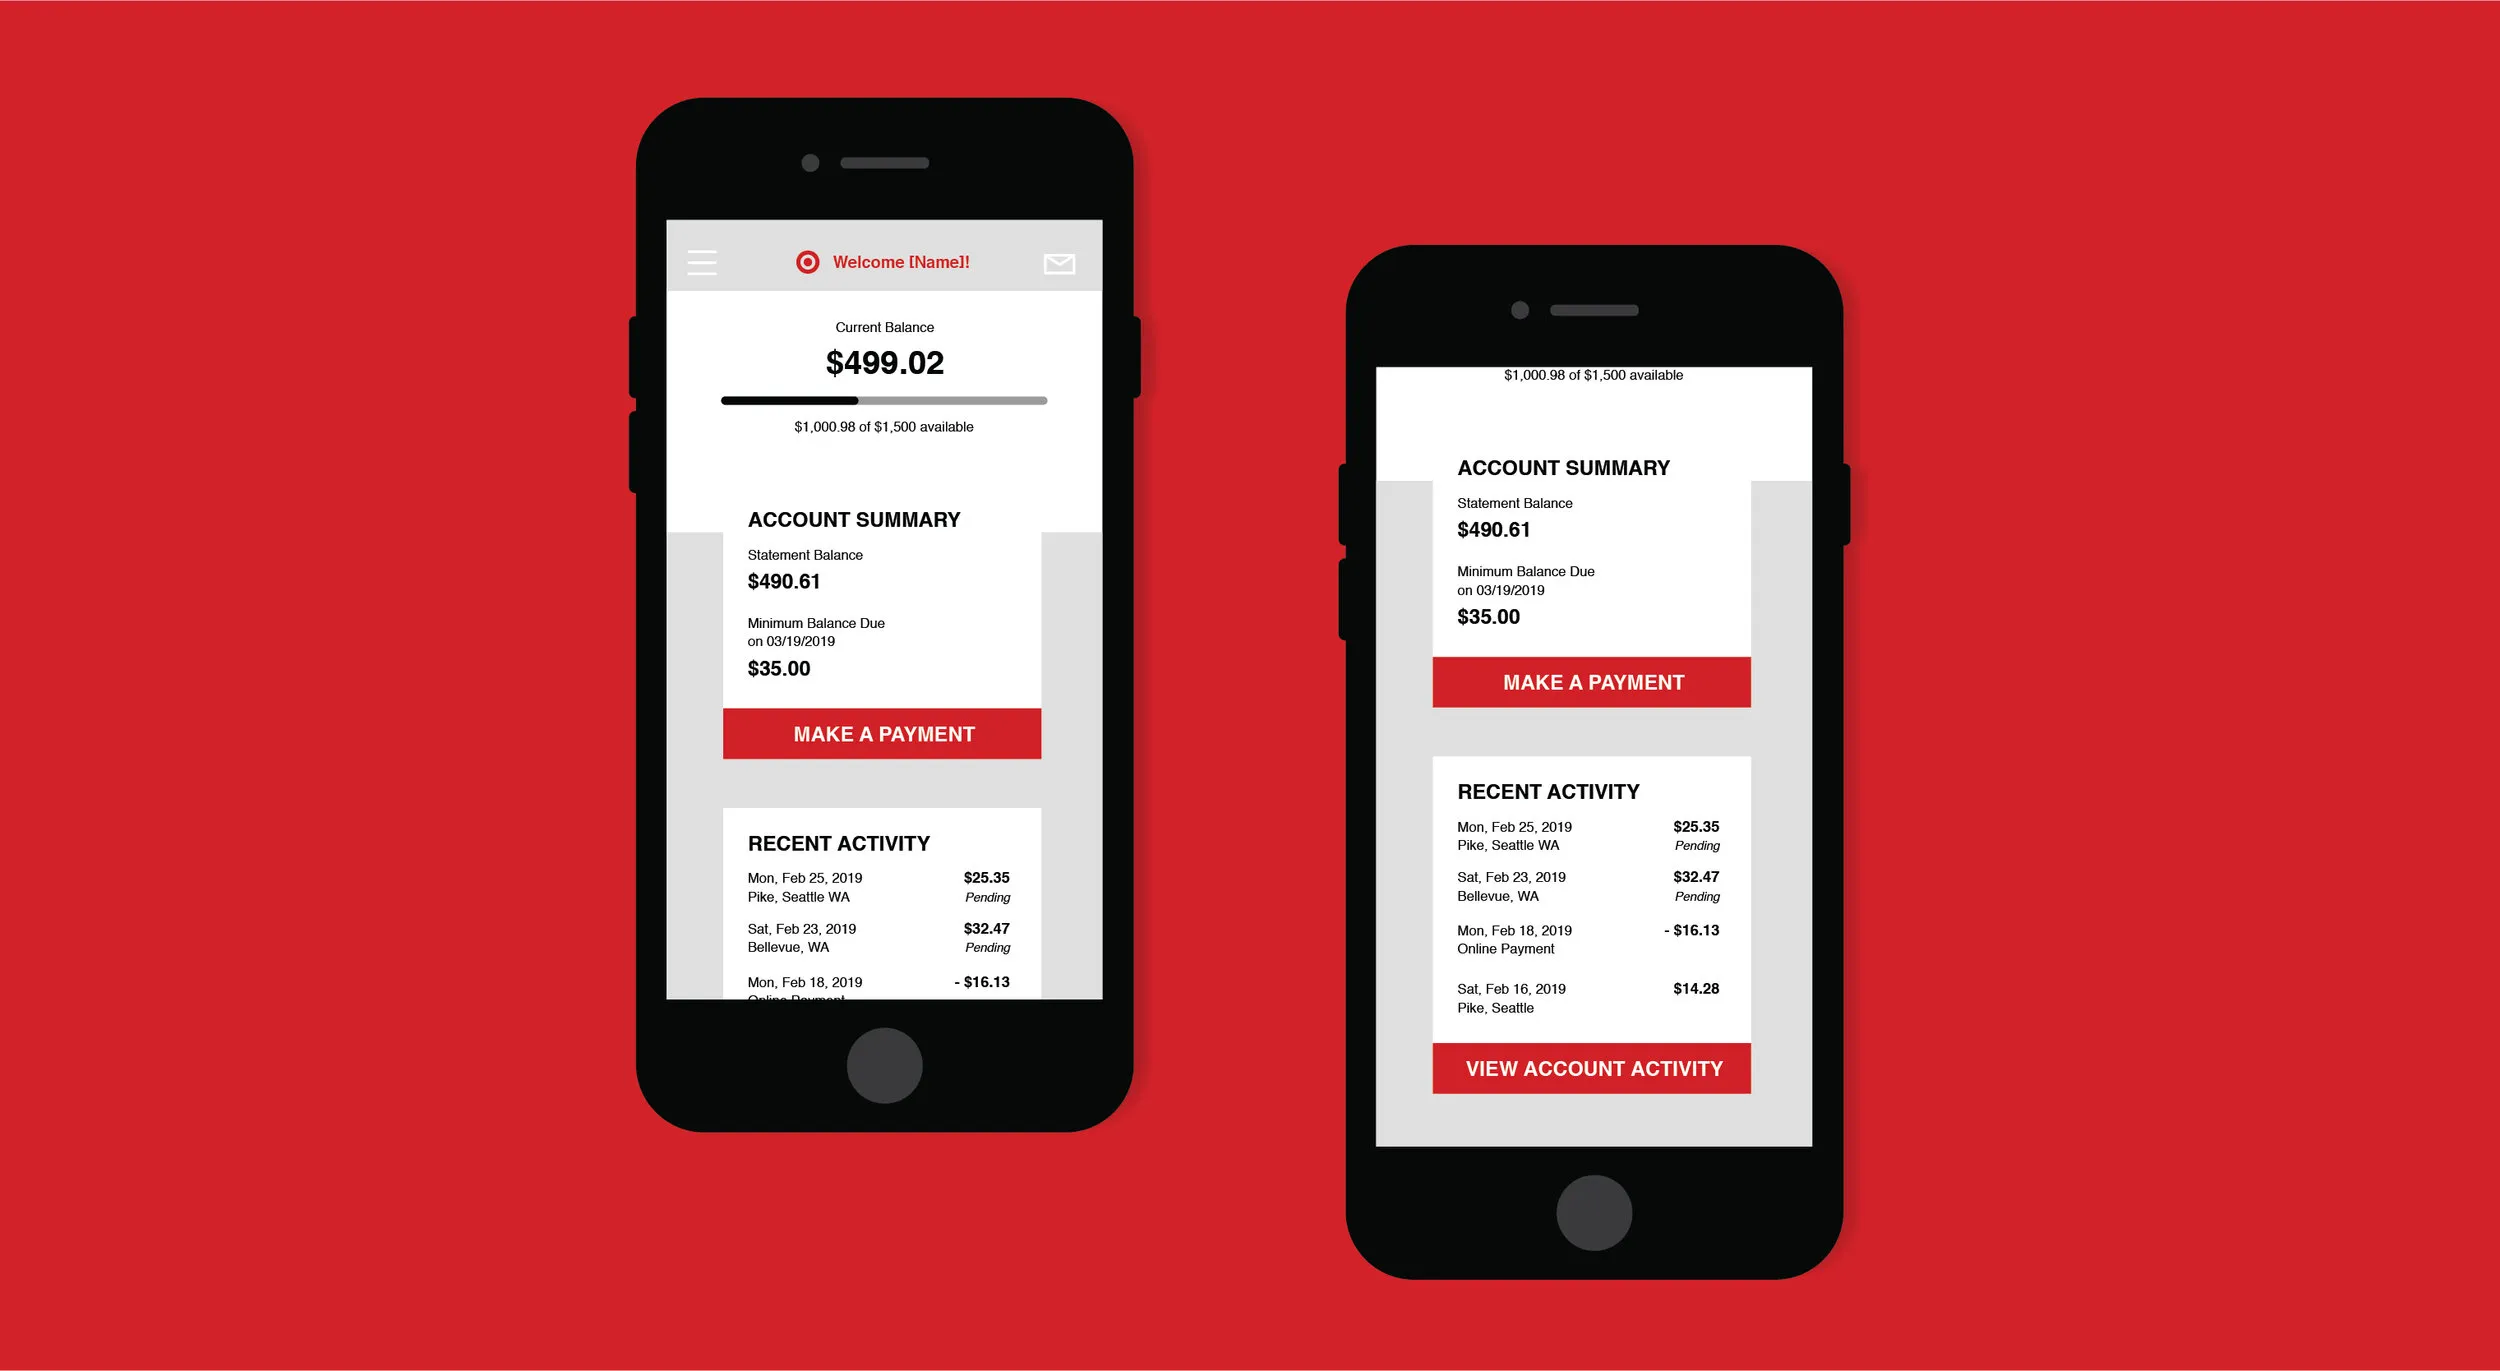 How Do I Check My RedCard Balance on Target App?